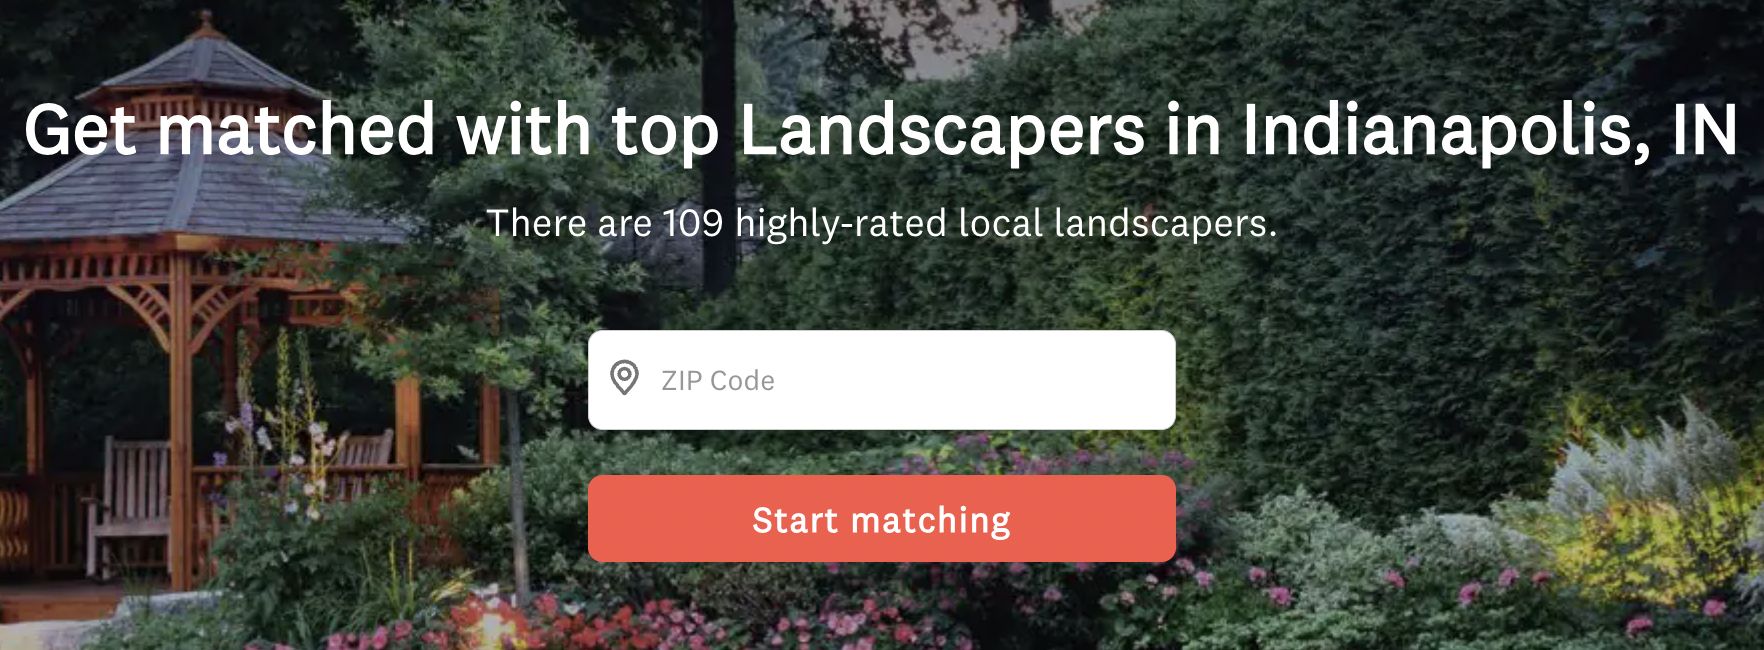 Page element showing an image of a garden on a landscaper search page